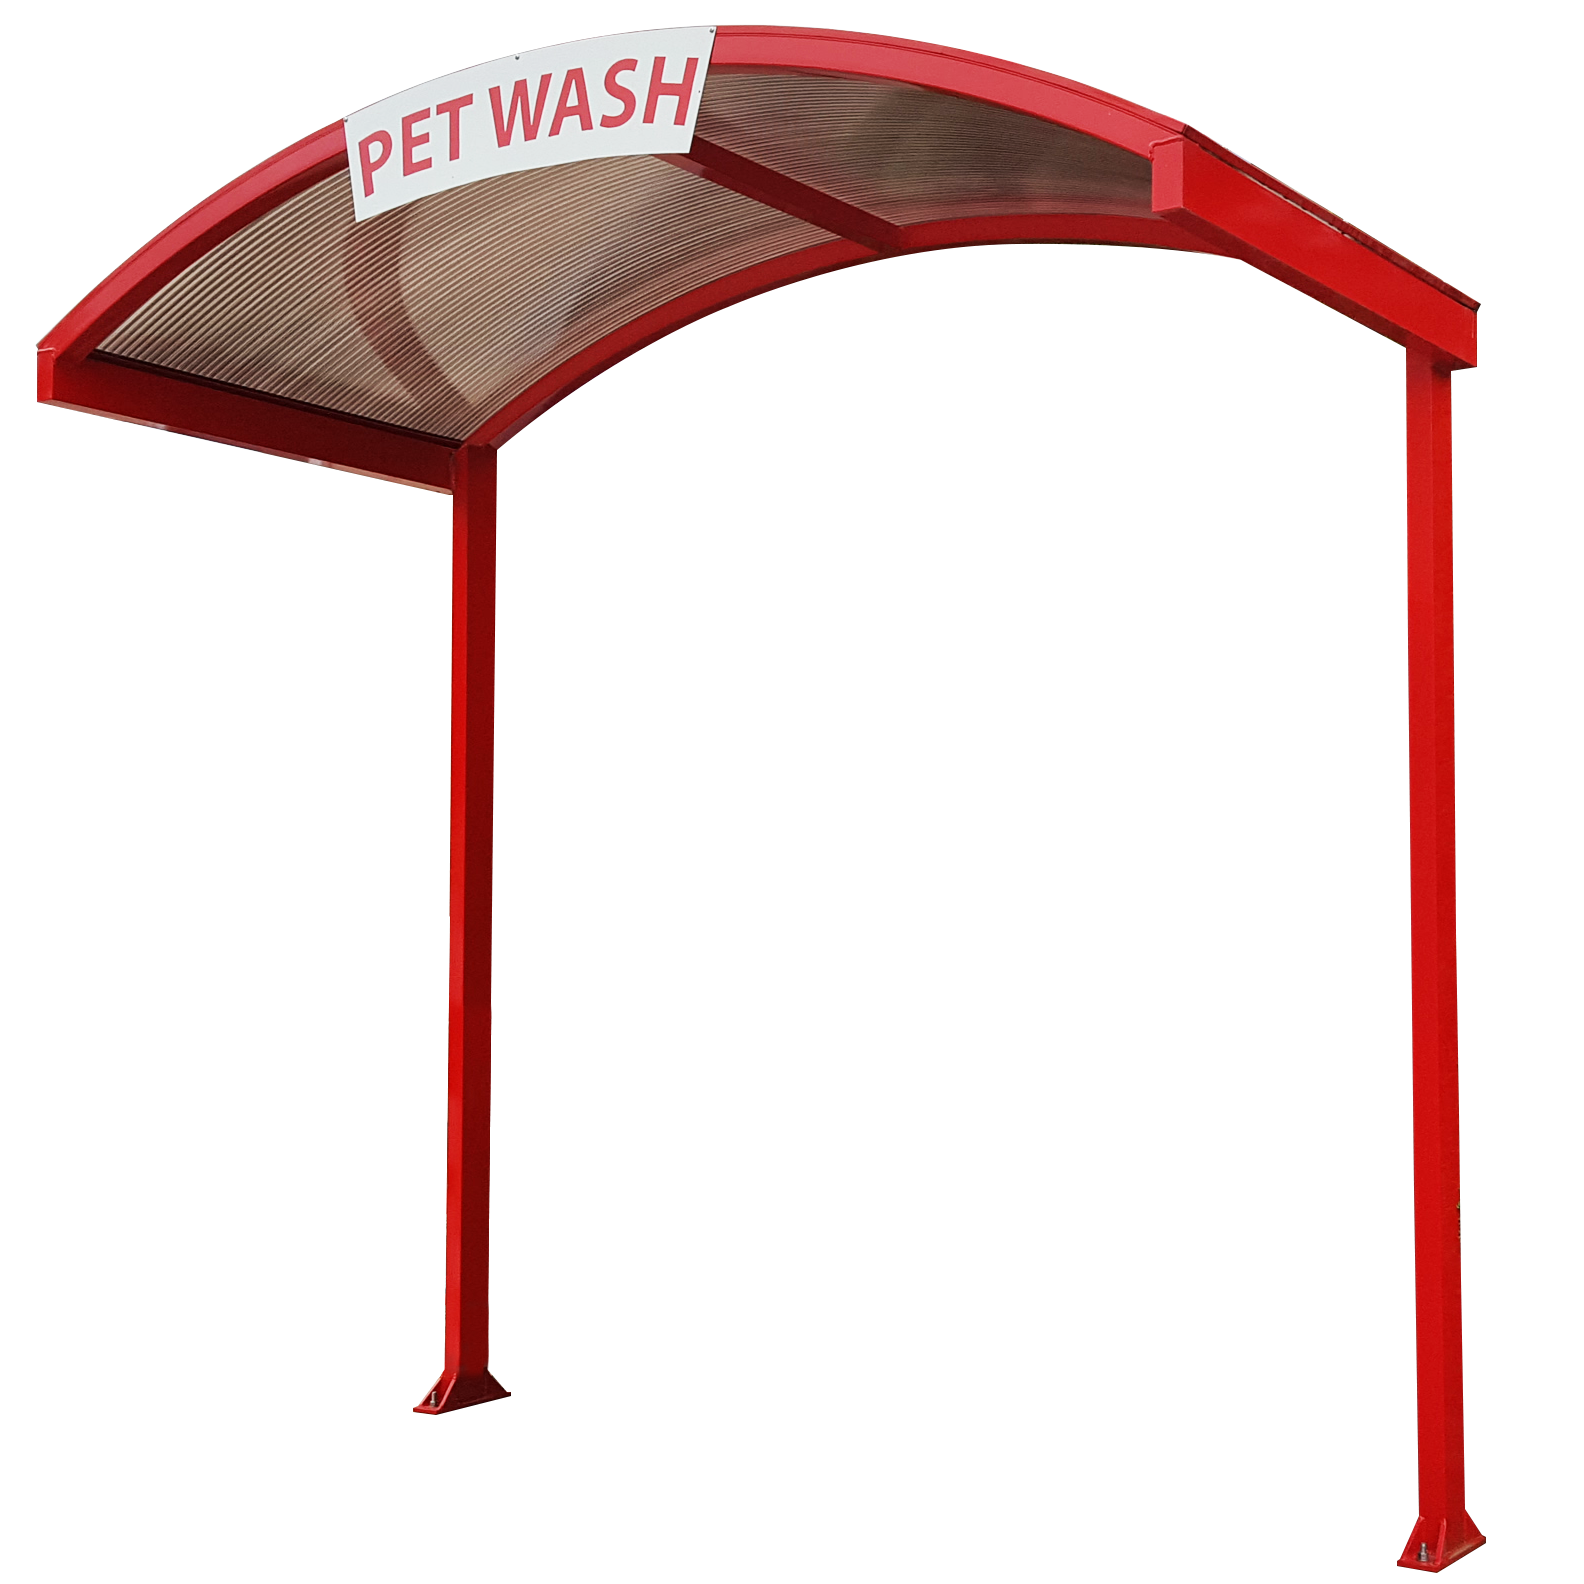 a red pet wash awning